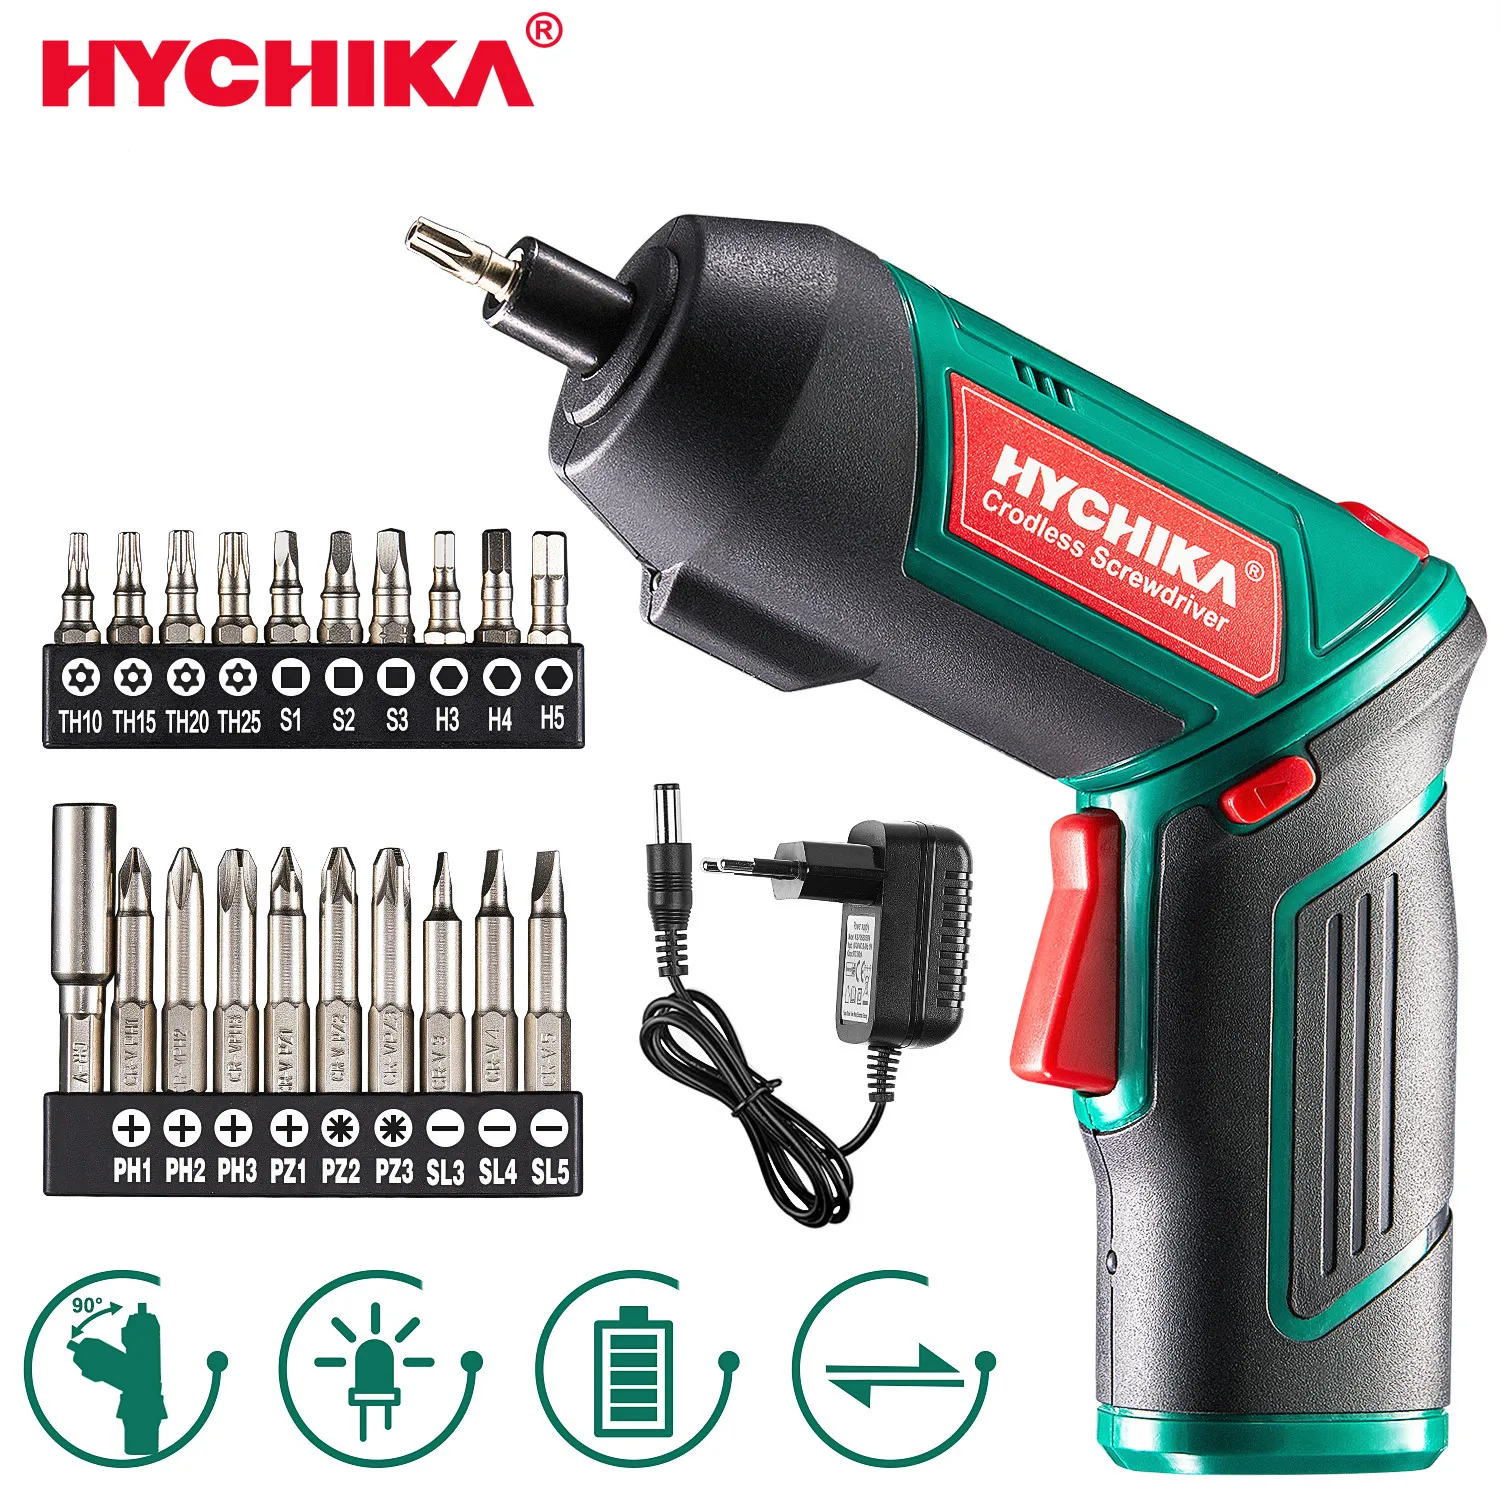 DC 3.6V Lithium Wireless Cordless Electric Power Screwdriver Tool w/ Charger e 